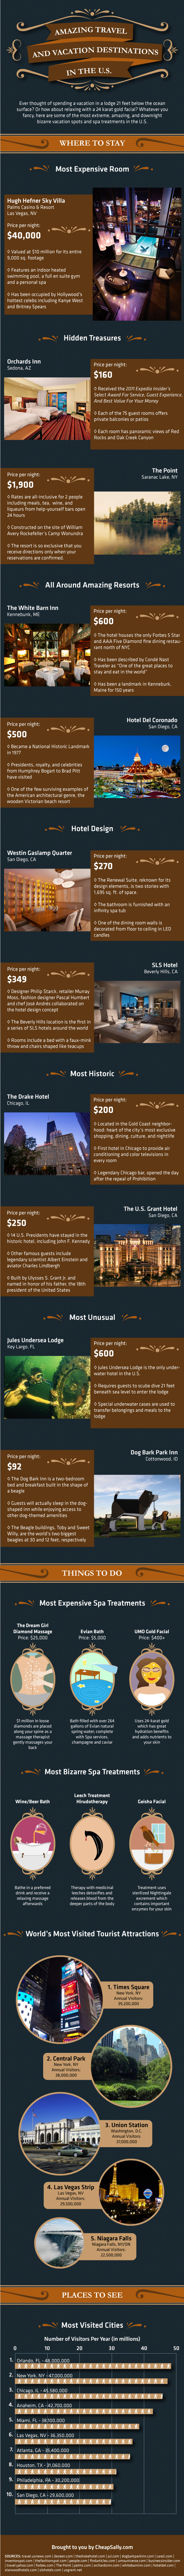 Cheap-Sally-Travel-Vacation-Sites-Infographic-final